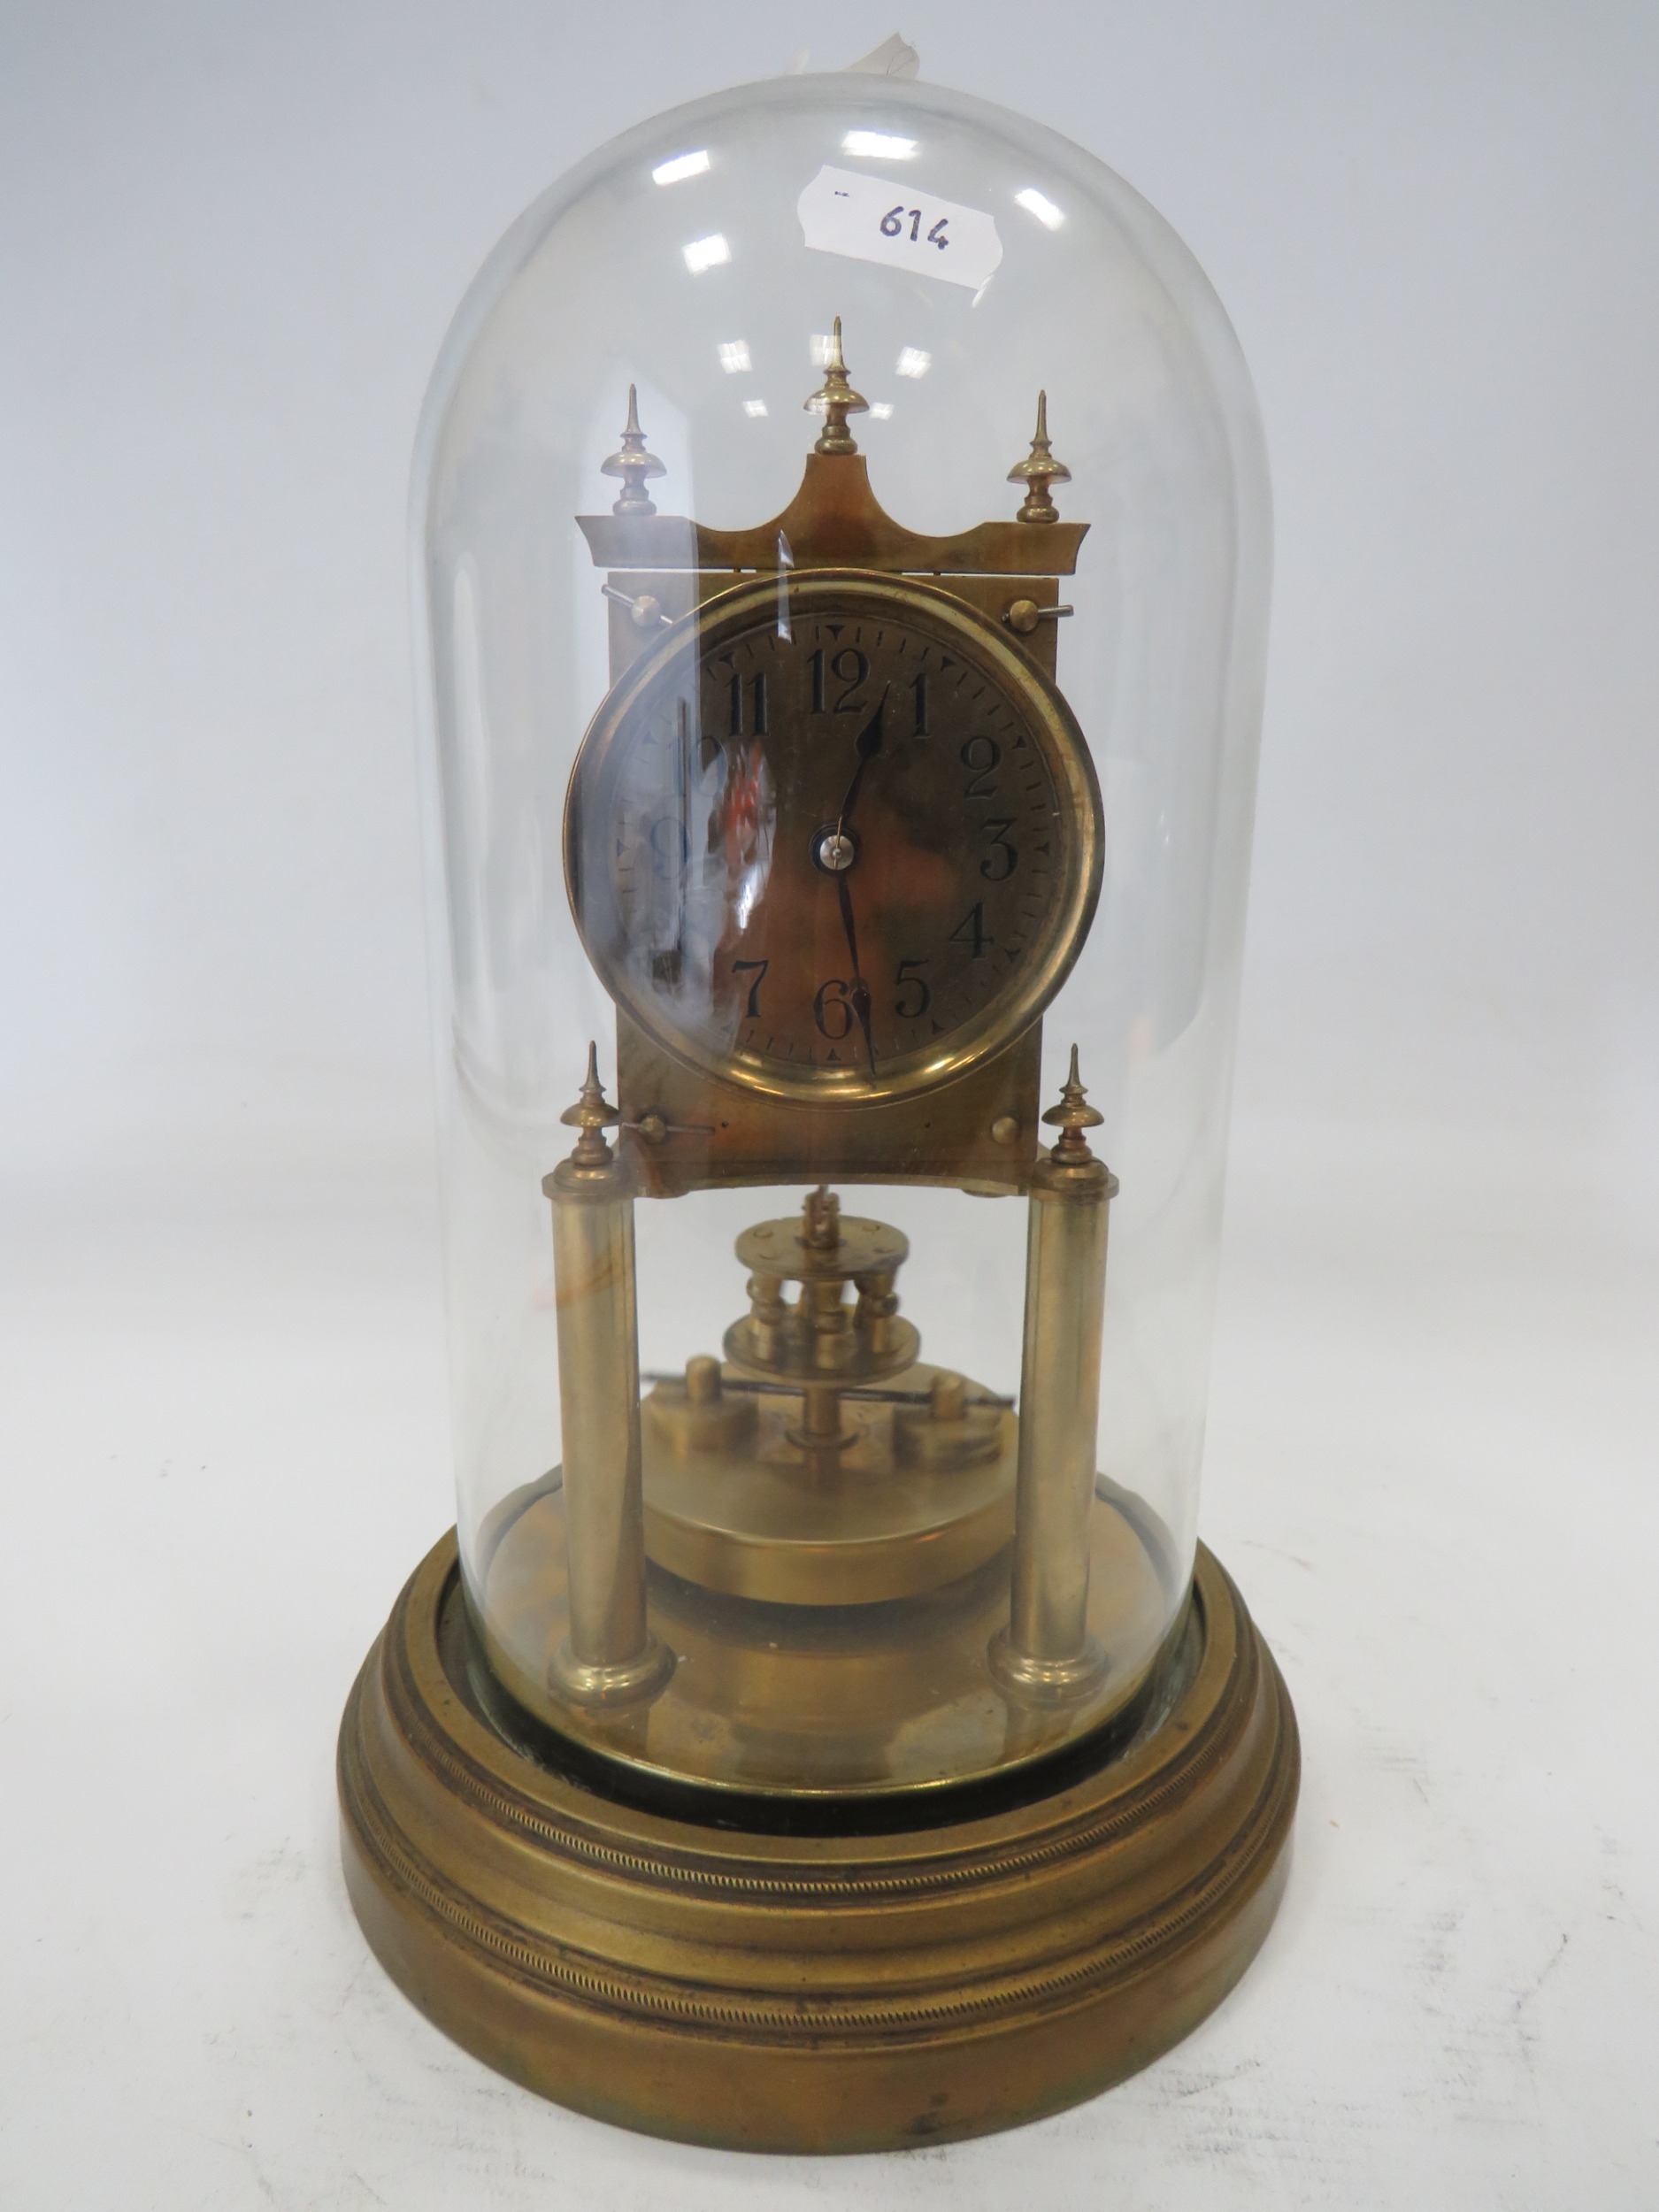 Brass Based Anniversary clock under a Glass Dome which measures approx 11 inches tall. Makers Mark